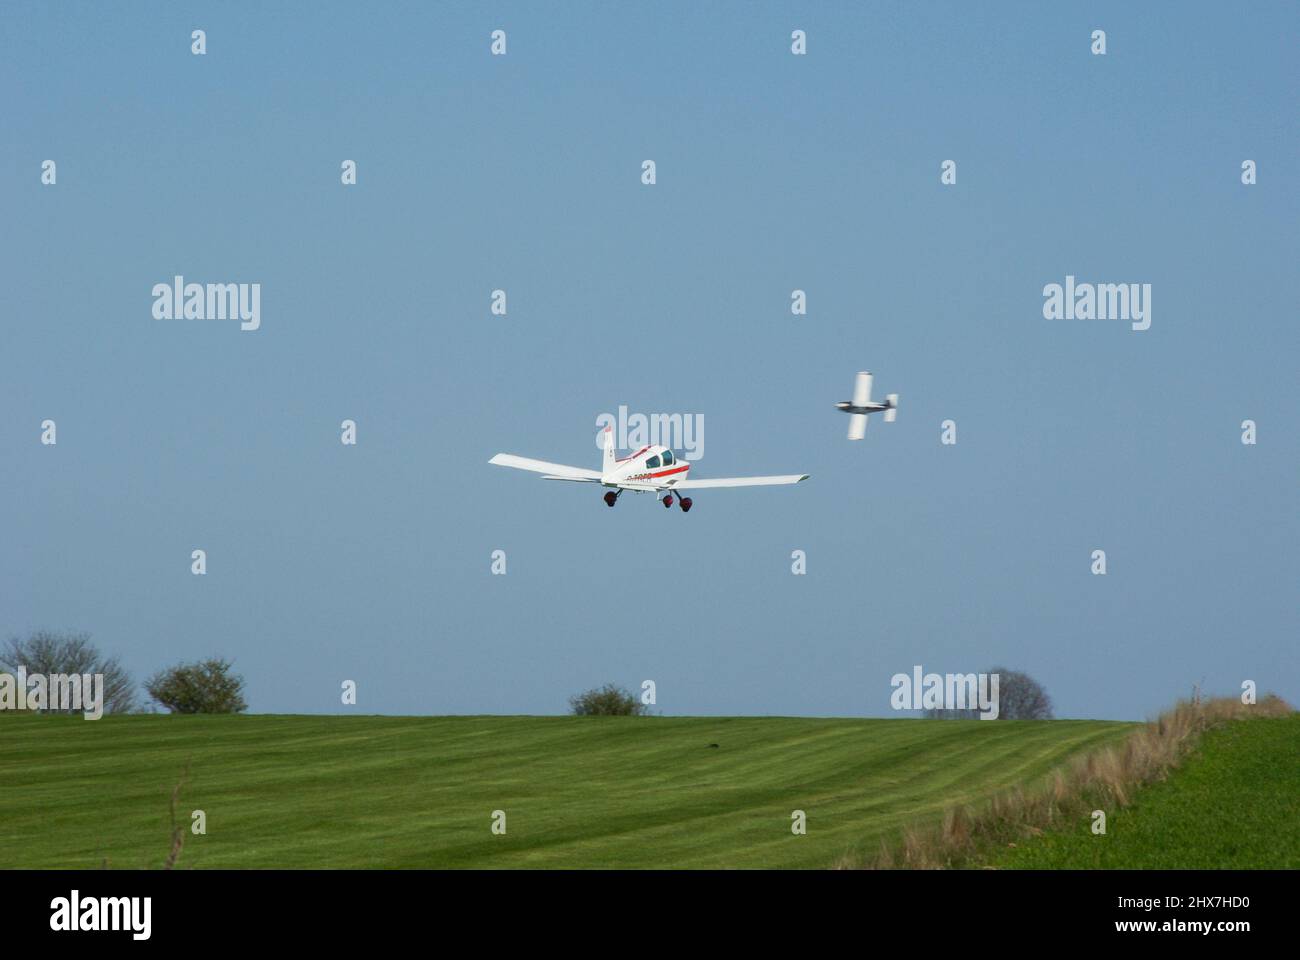 Planes taking off from Great Oakley grass airstrip in Essex to compete in the Royal Aero Club Air Race. Small private planes flying in air racing Stock Photo